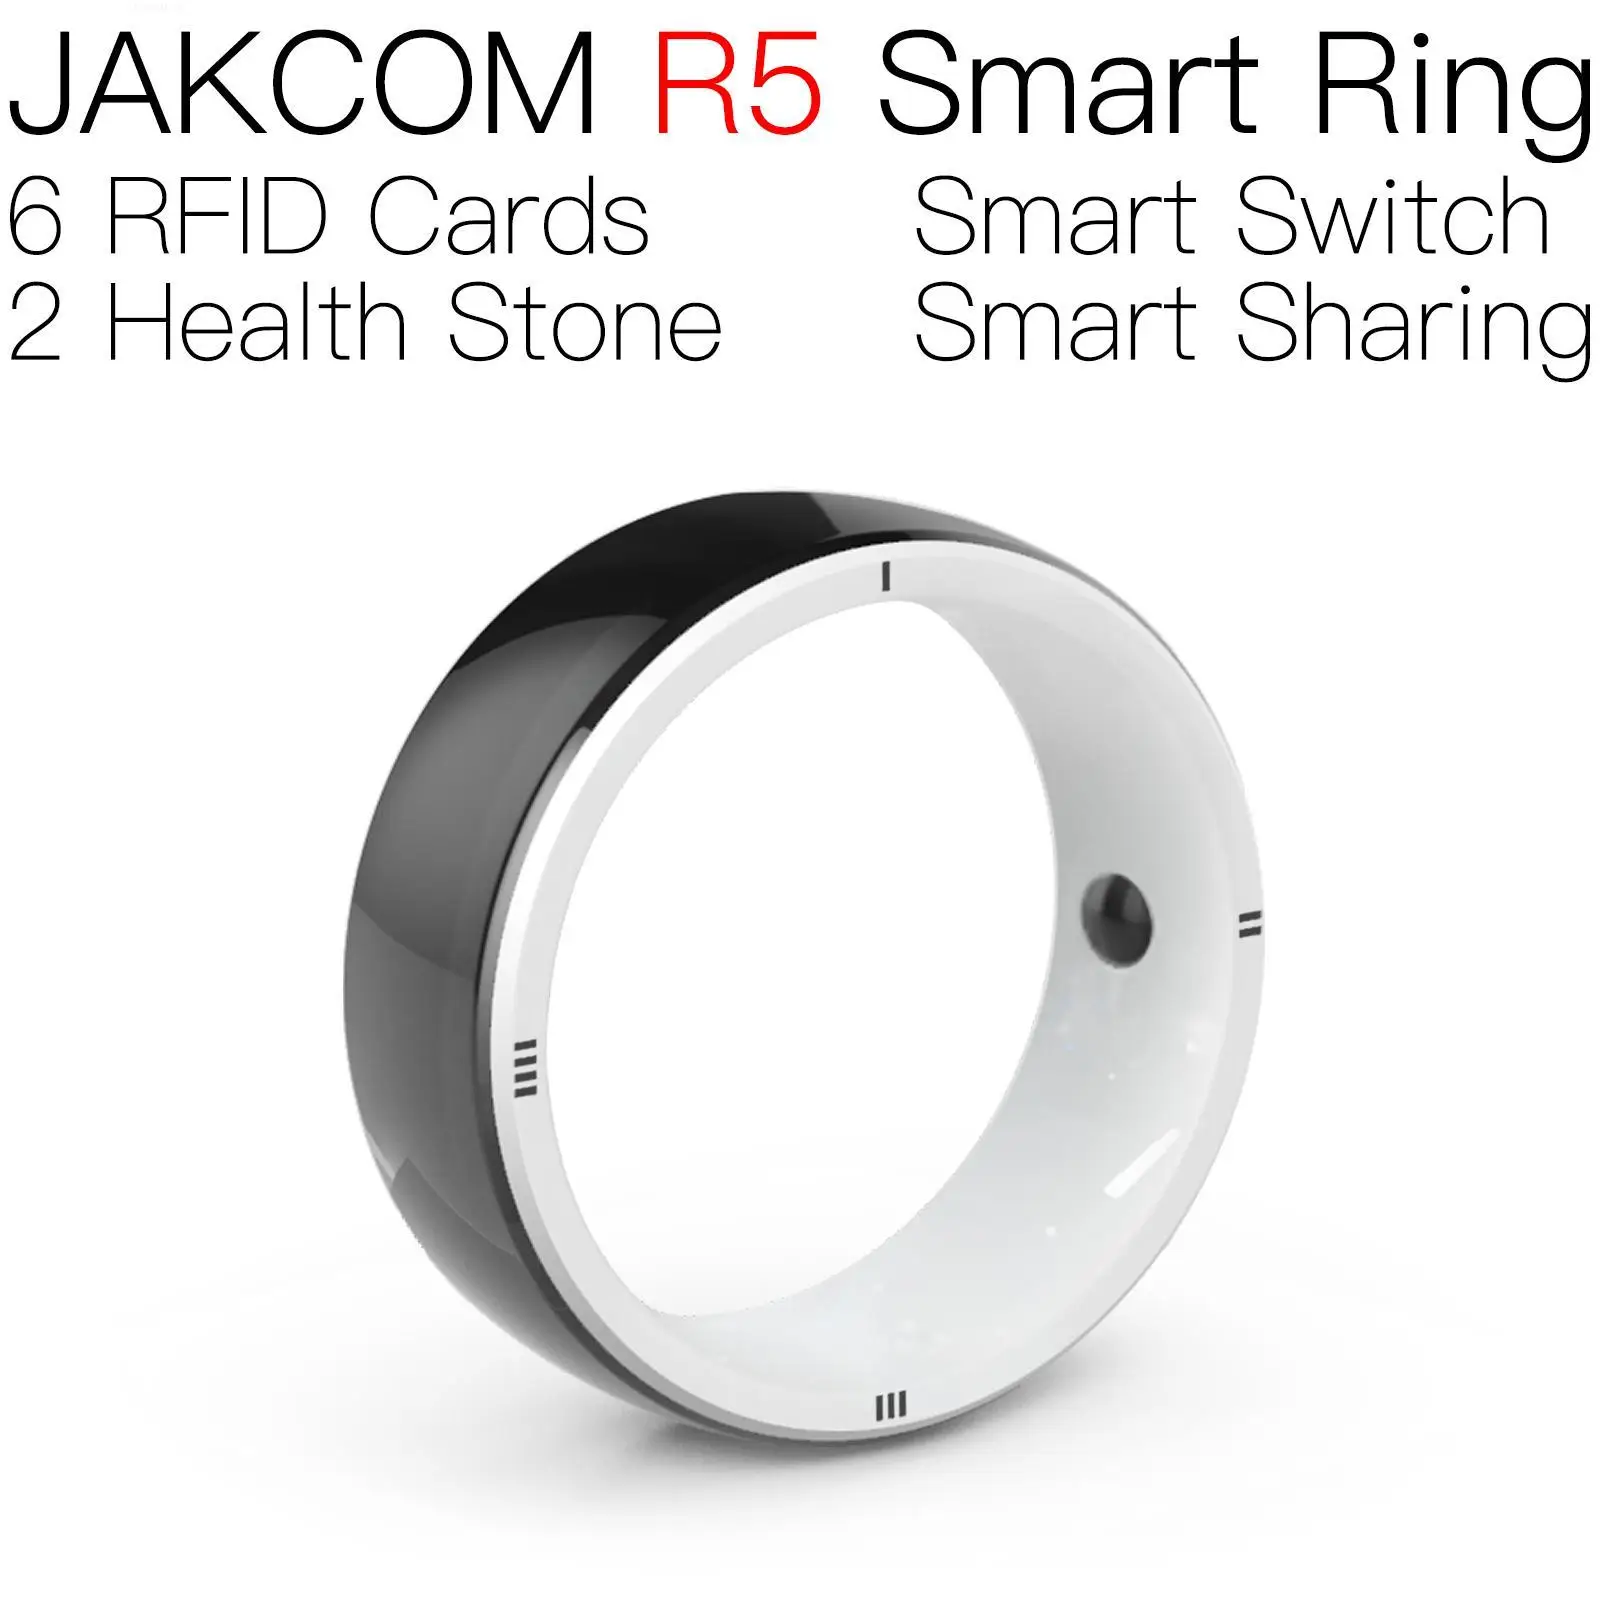 

JAKCOM R5 Smart Ring Newer than uid chinese cattle microchip prime video strong nfc tag uhf rfid reader mini container stash